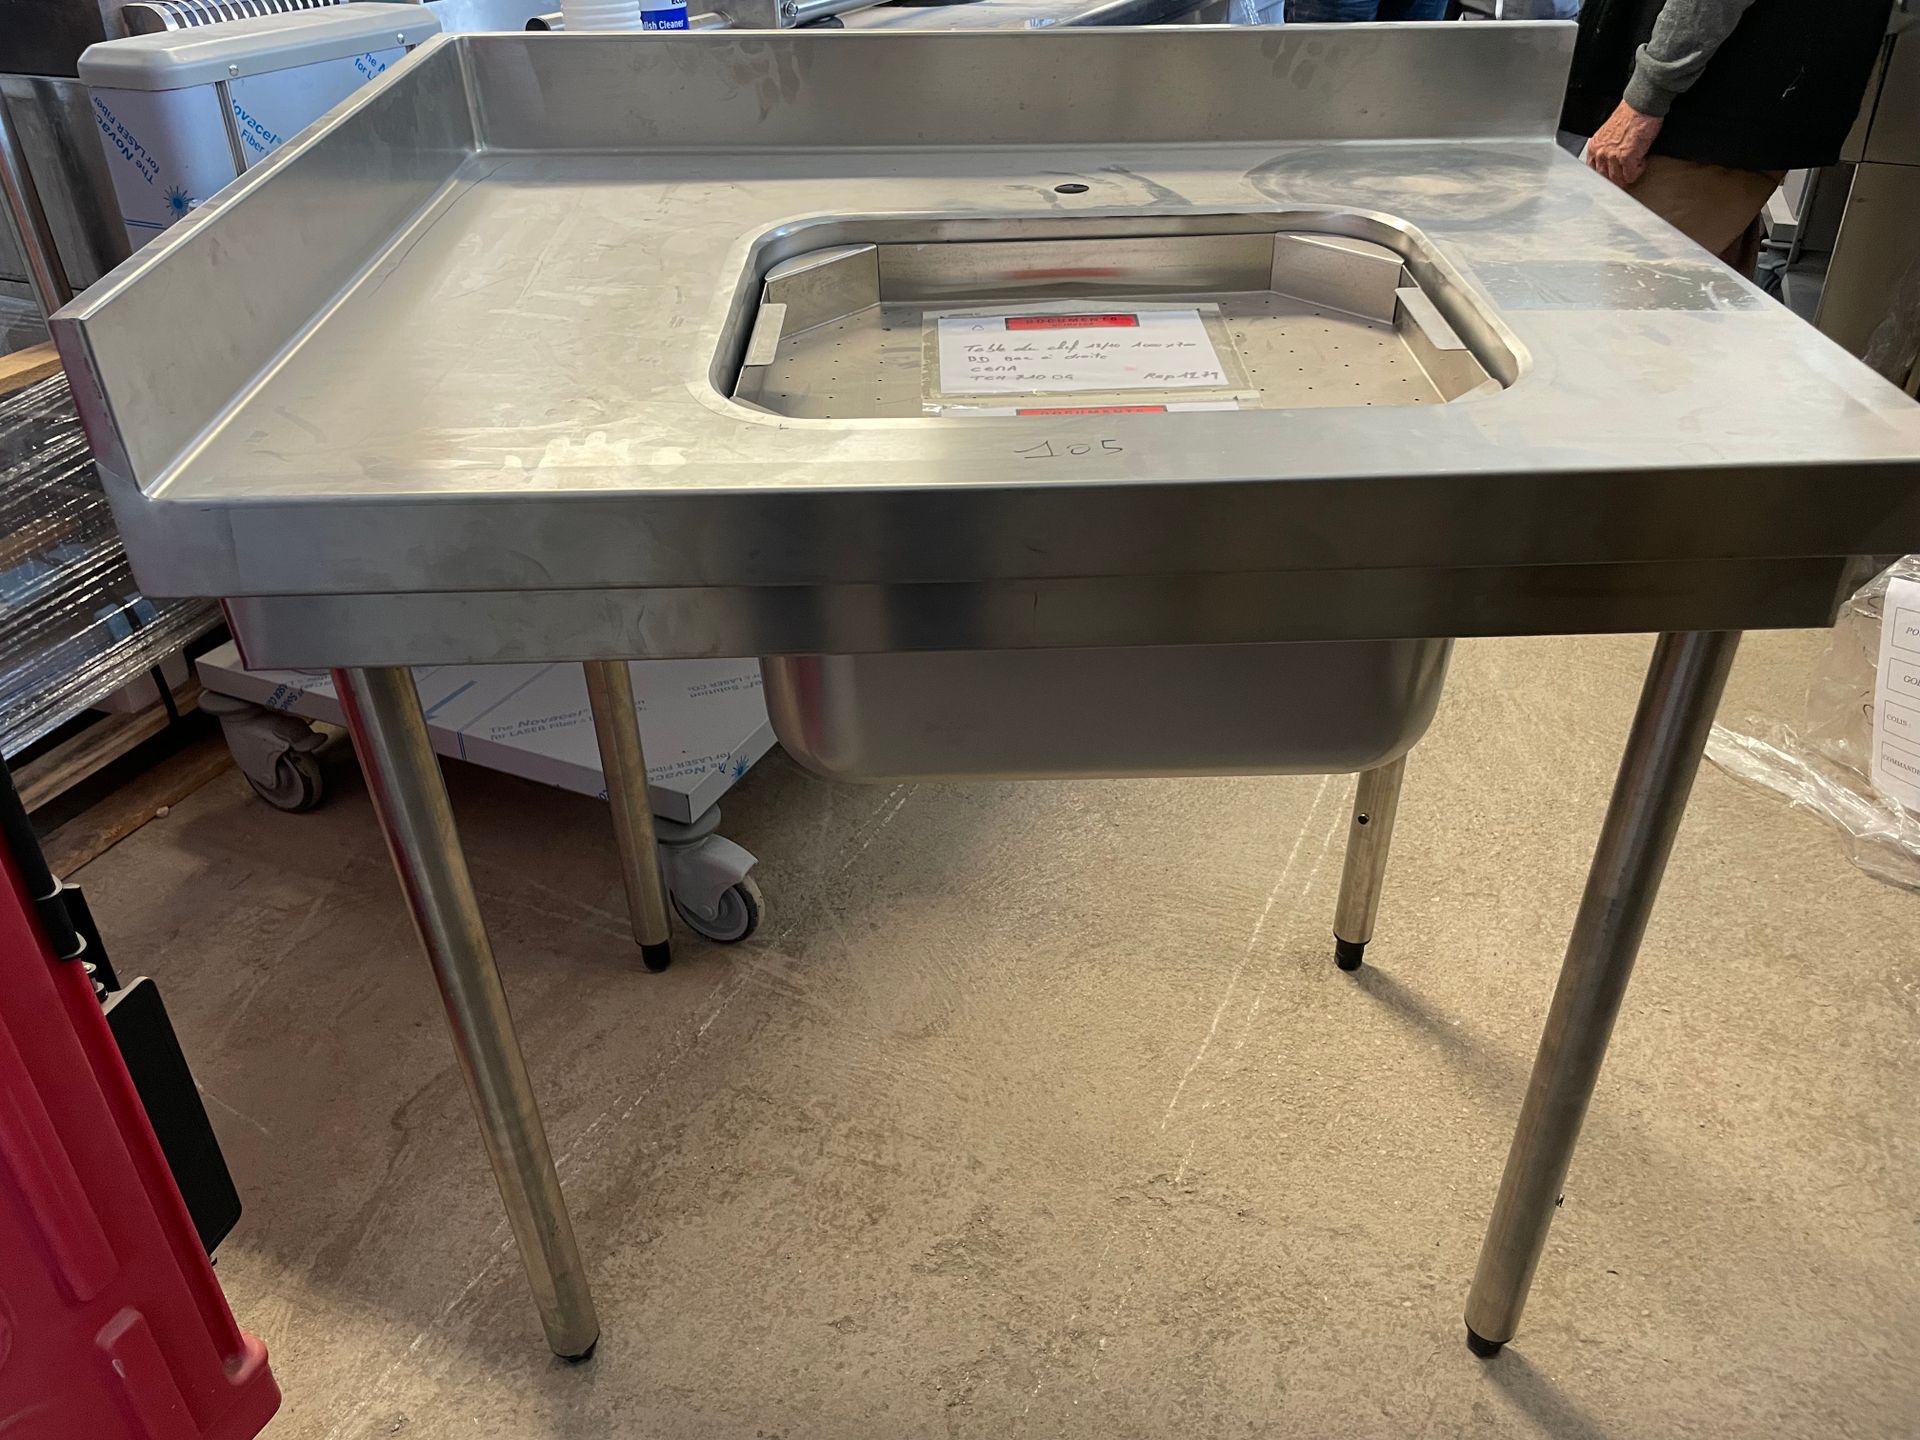 Null BONNET THIRODE. Stainless steel chef's table (15/10). 1000x700.

LONGVIC